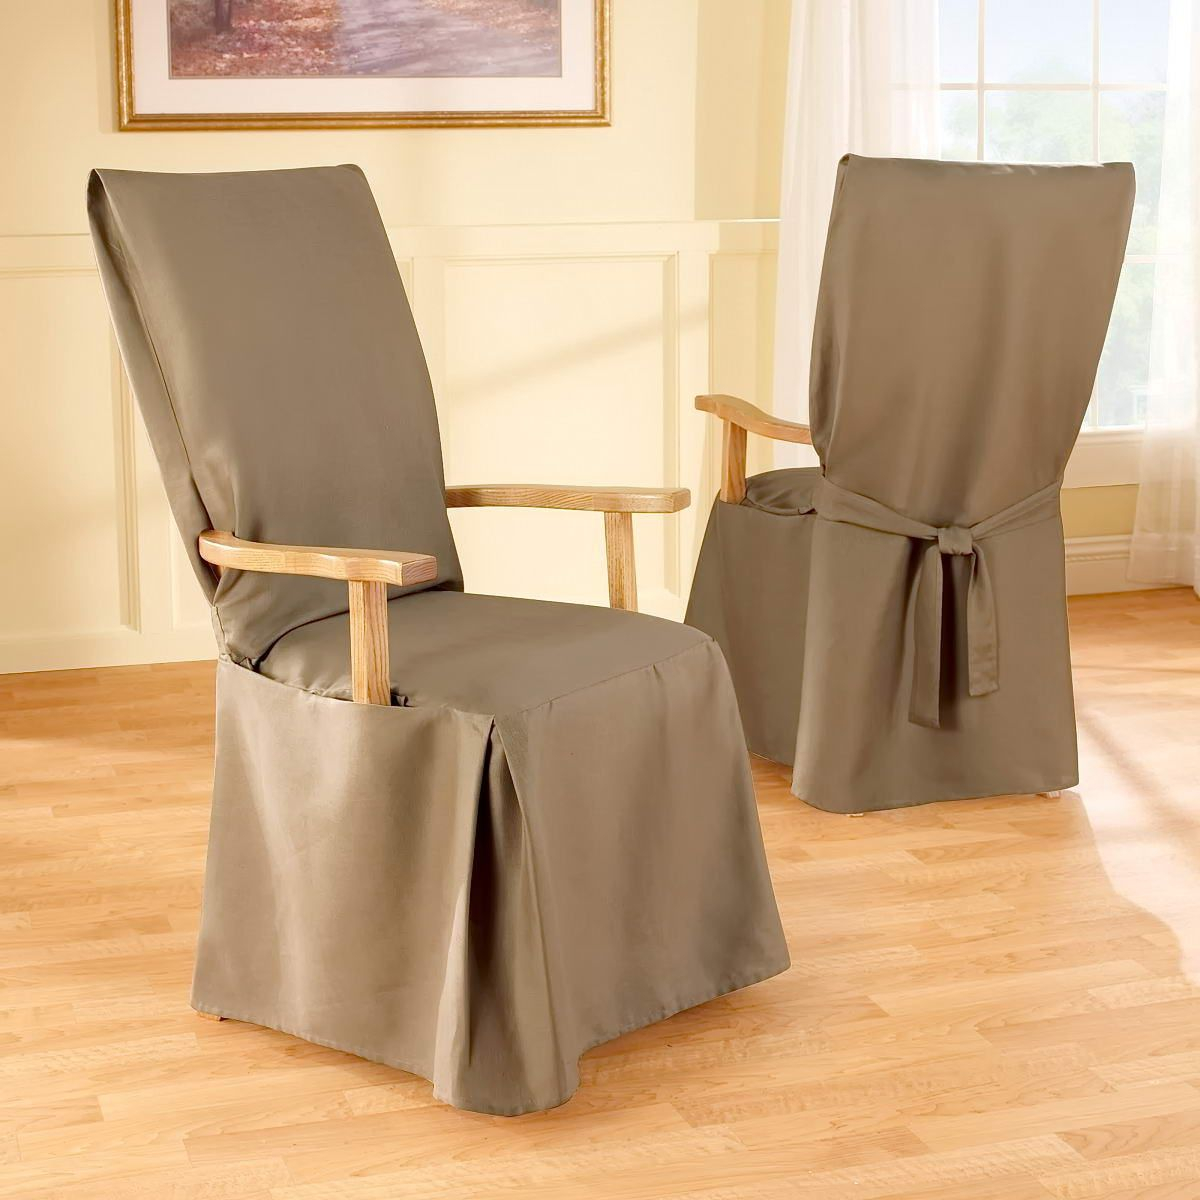 Slipcovers For Dining Room Chairs With Arms Slipcovers For inside proportions 1200 X 1200